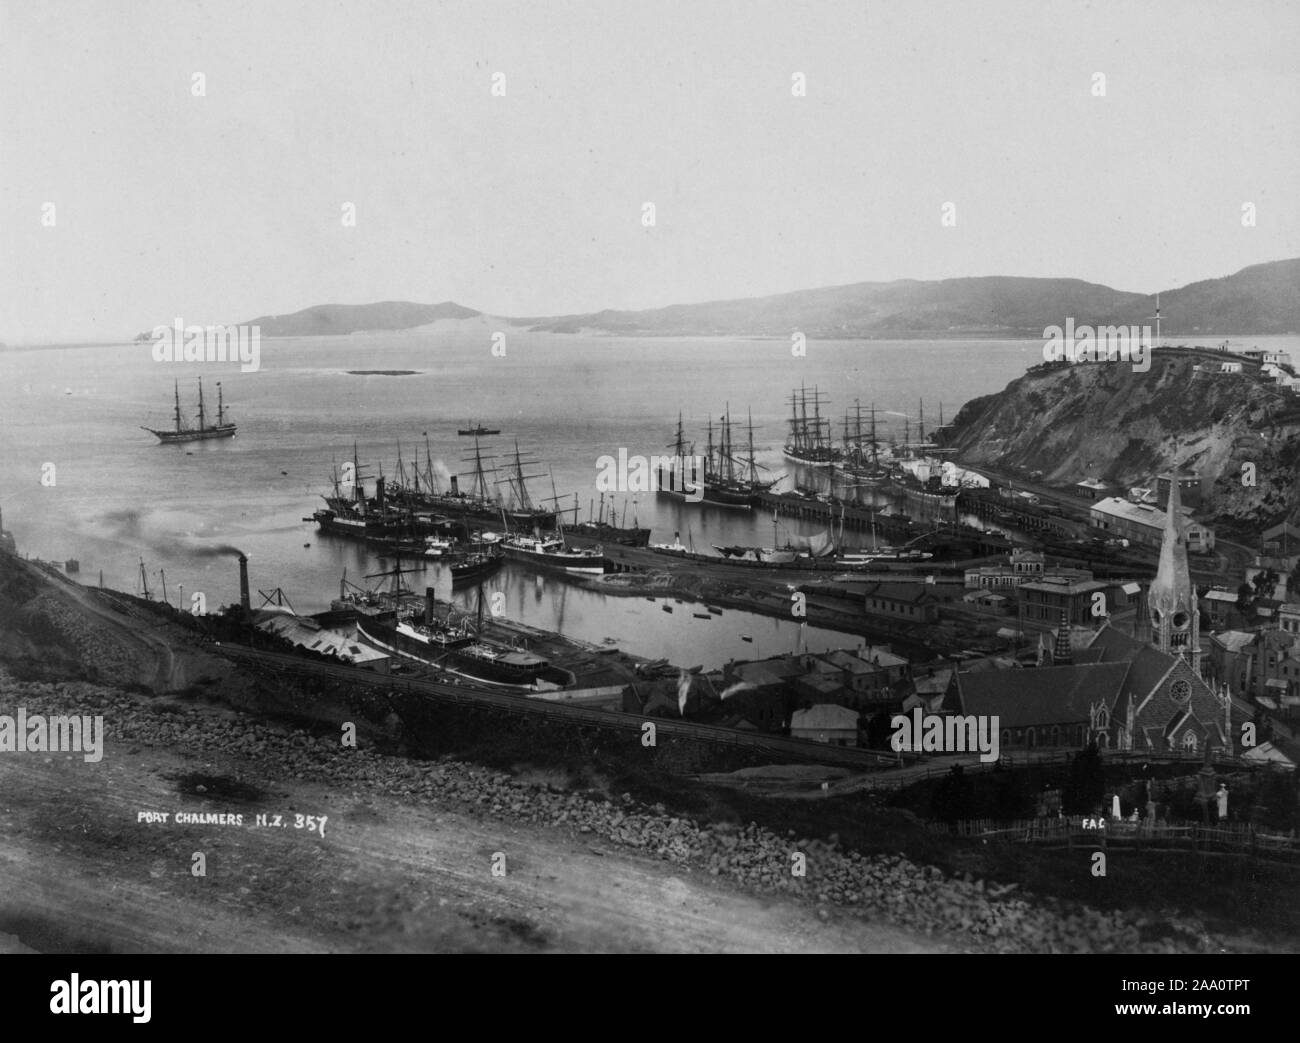 Black and white landscape photograph of Port Chalmers, a suburb and the main port of the city of Dunedin, South Island, New Zealand, by photographer Frank Coxhead, 1885. From the New York Public Library. () Stock Photo